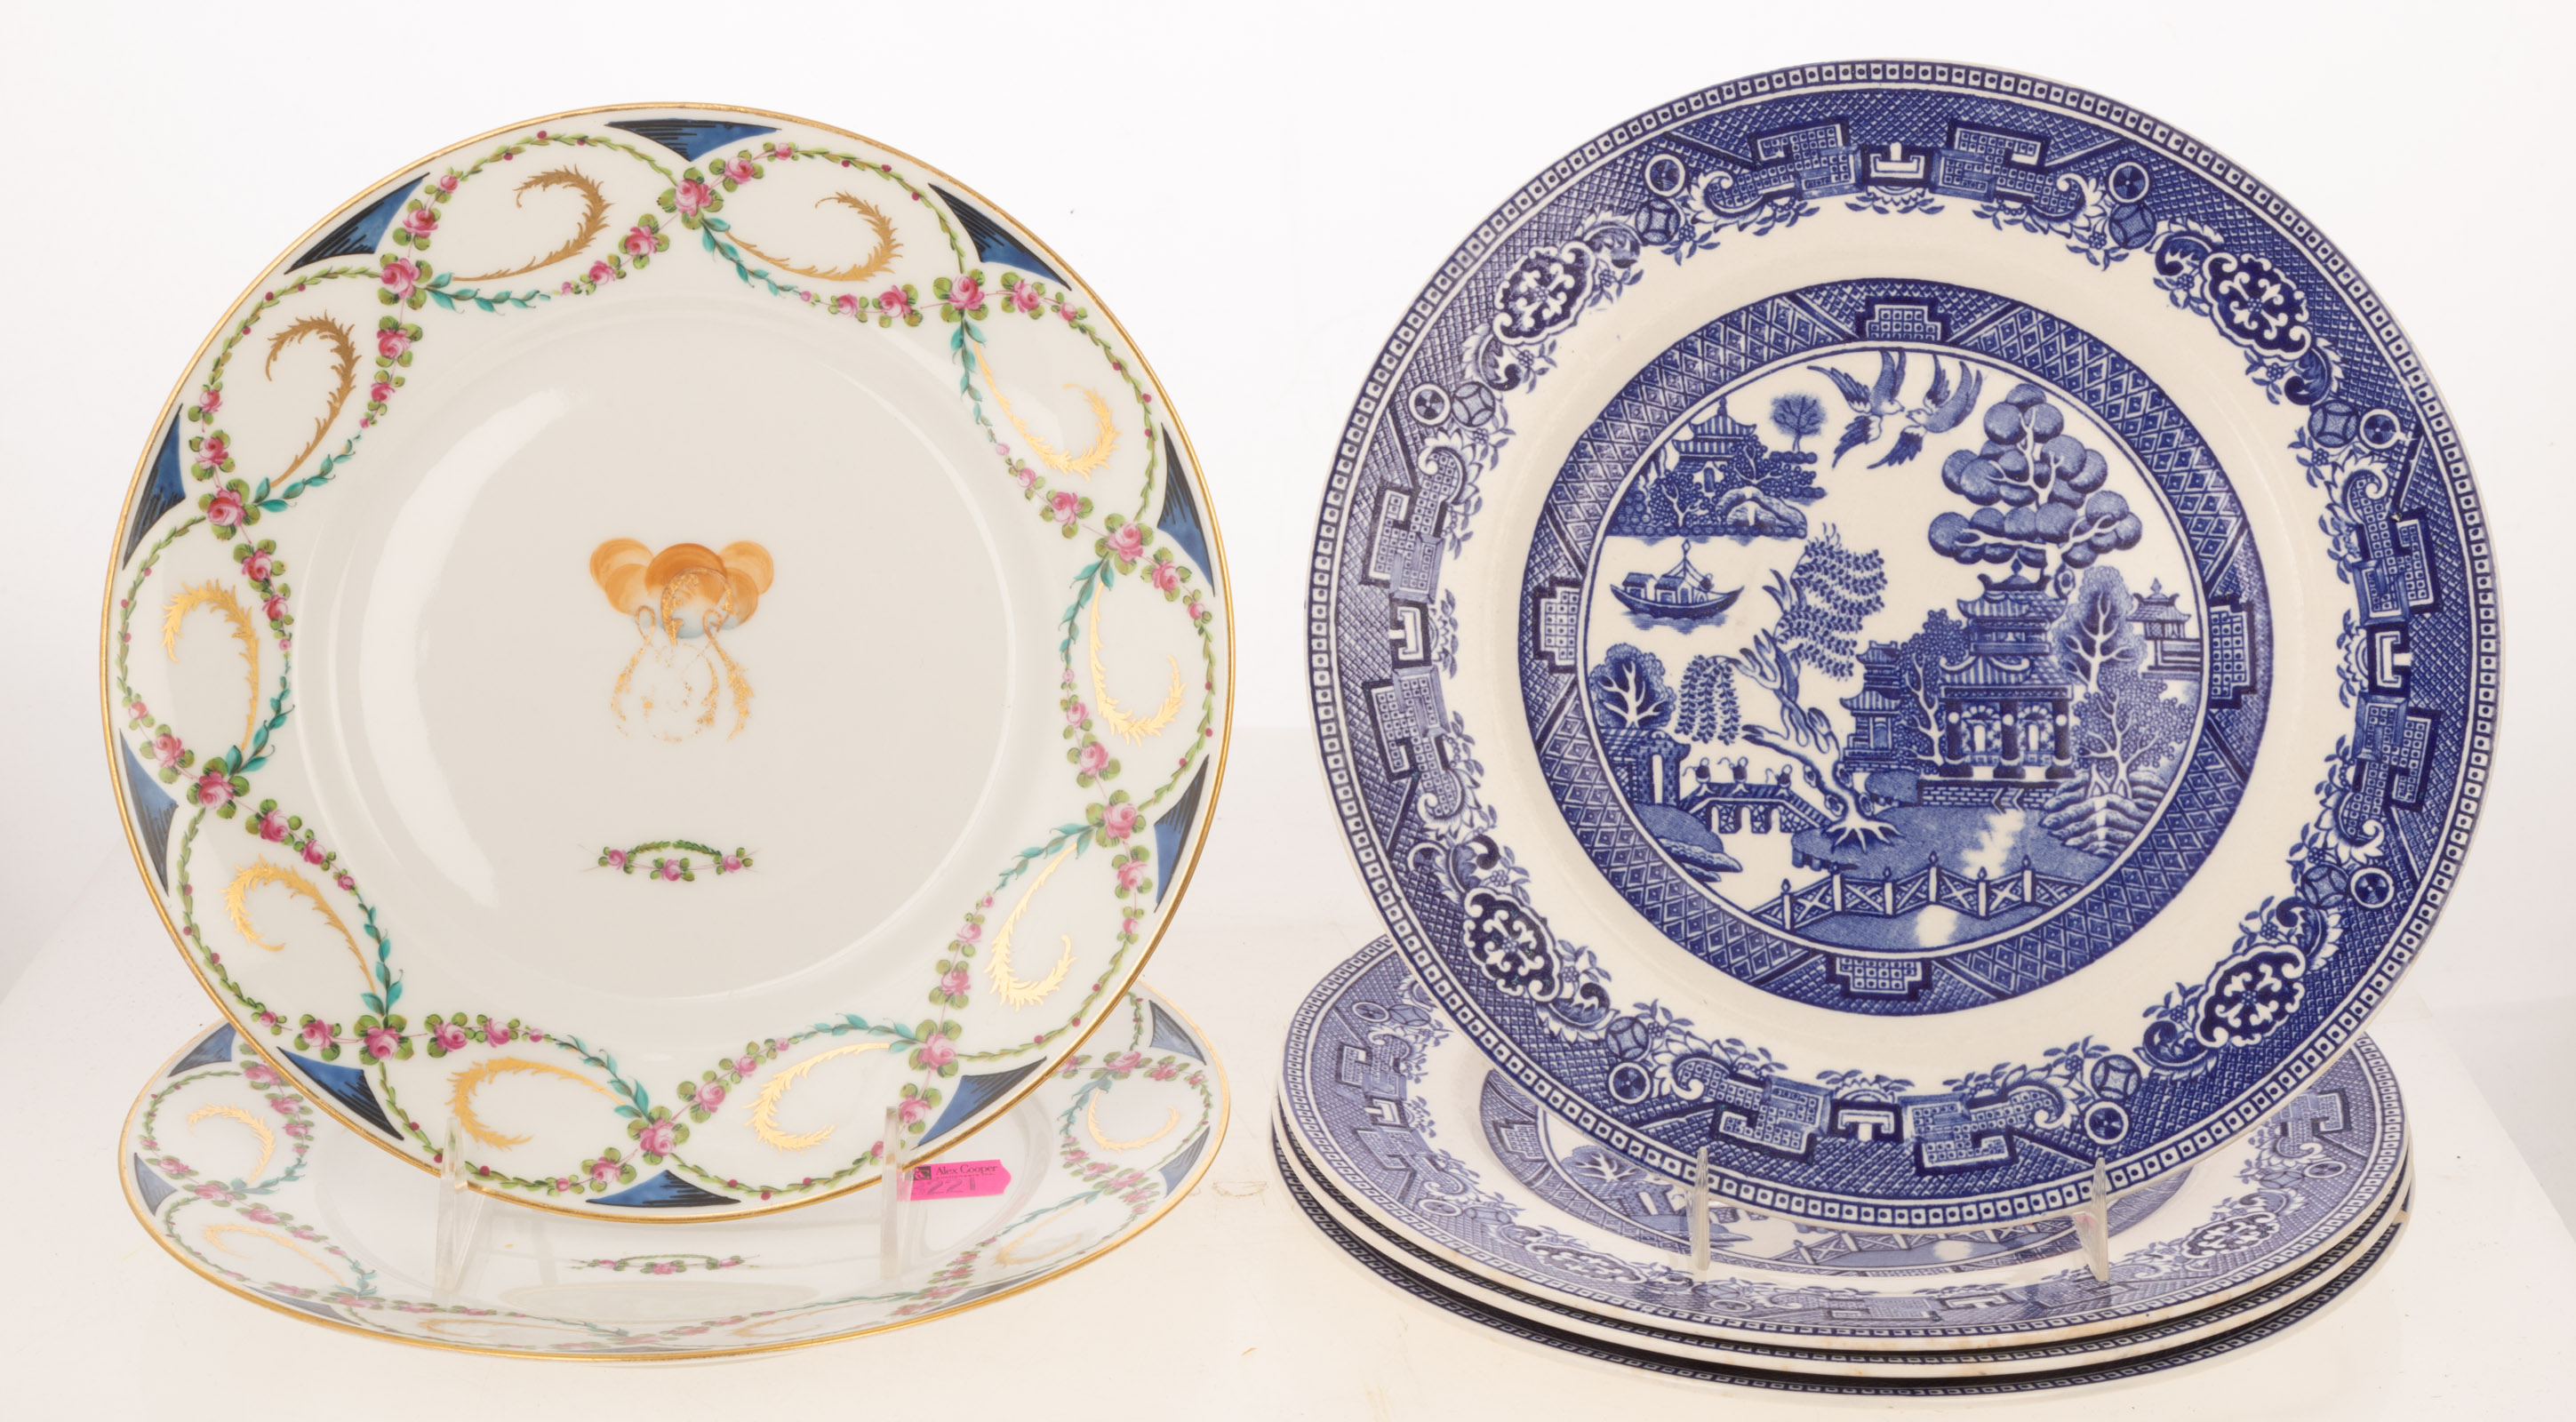 TWO PIECES OF FRENCH ARMORIAL DISHES 2e95a6